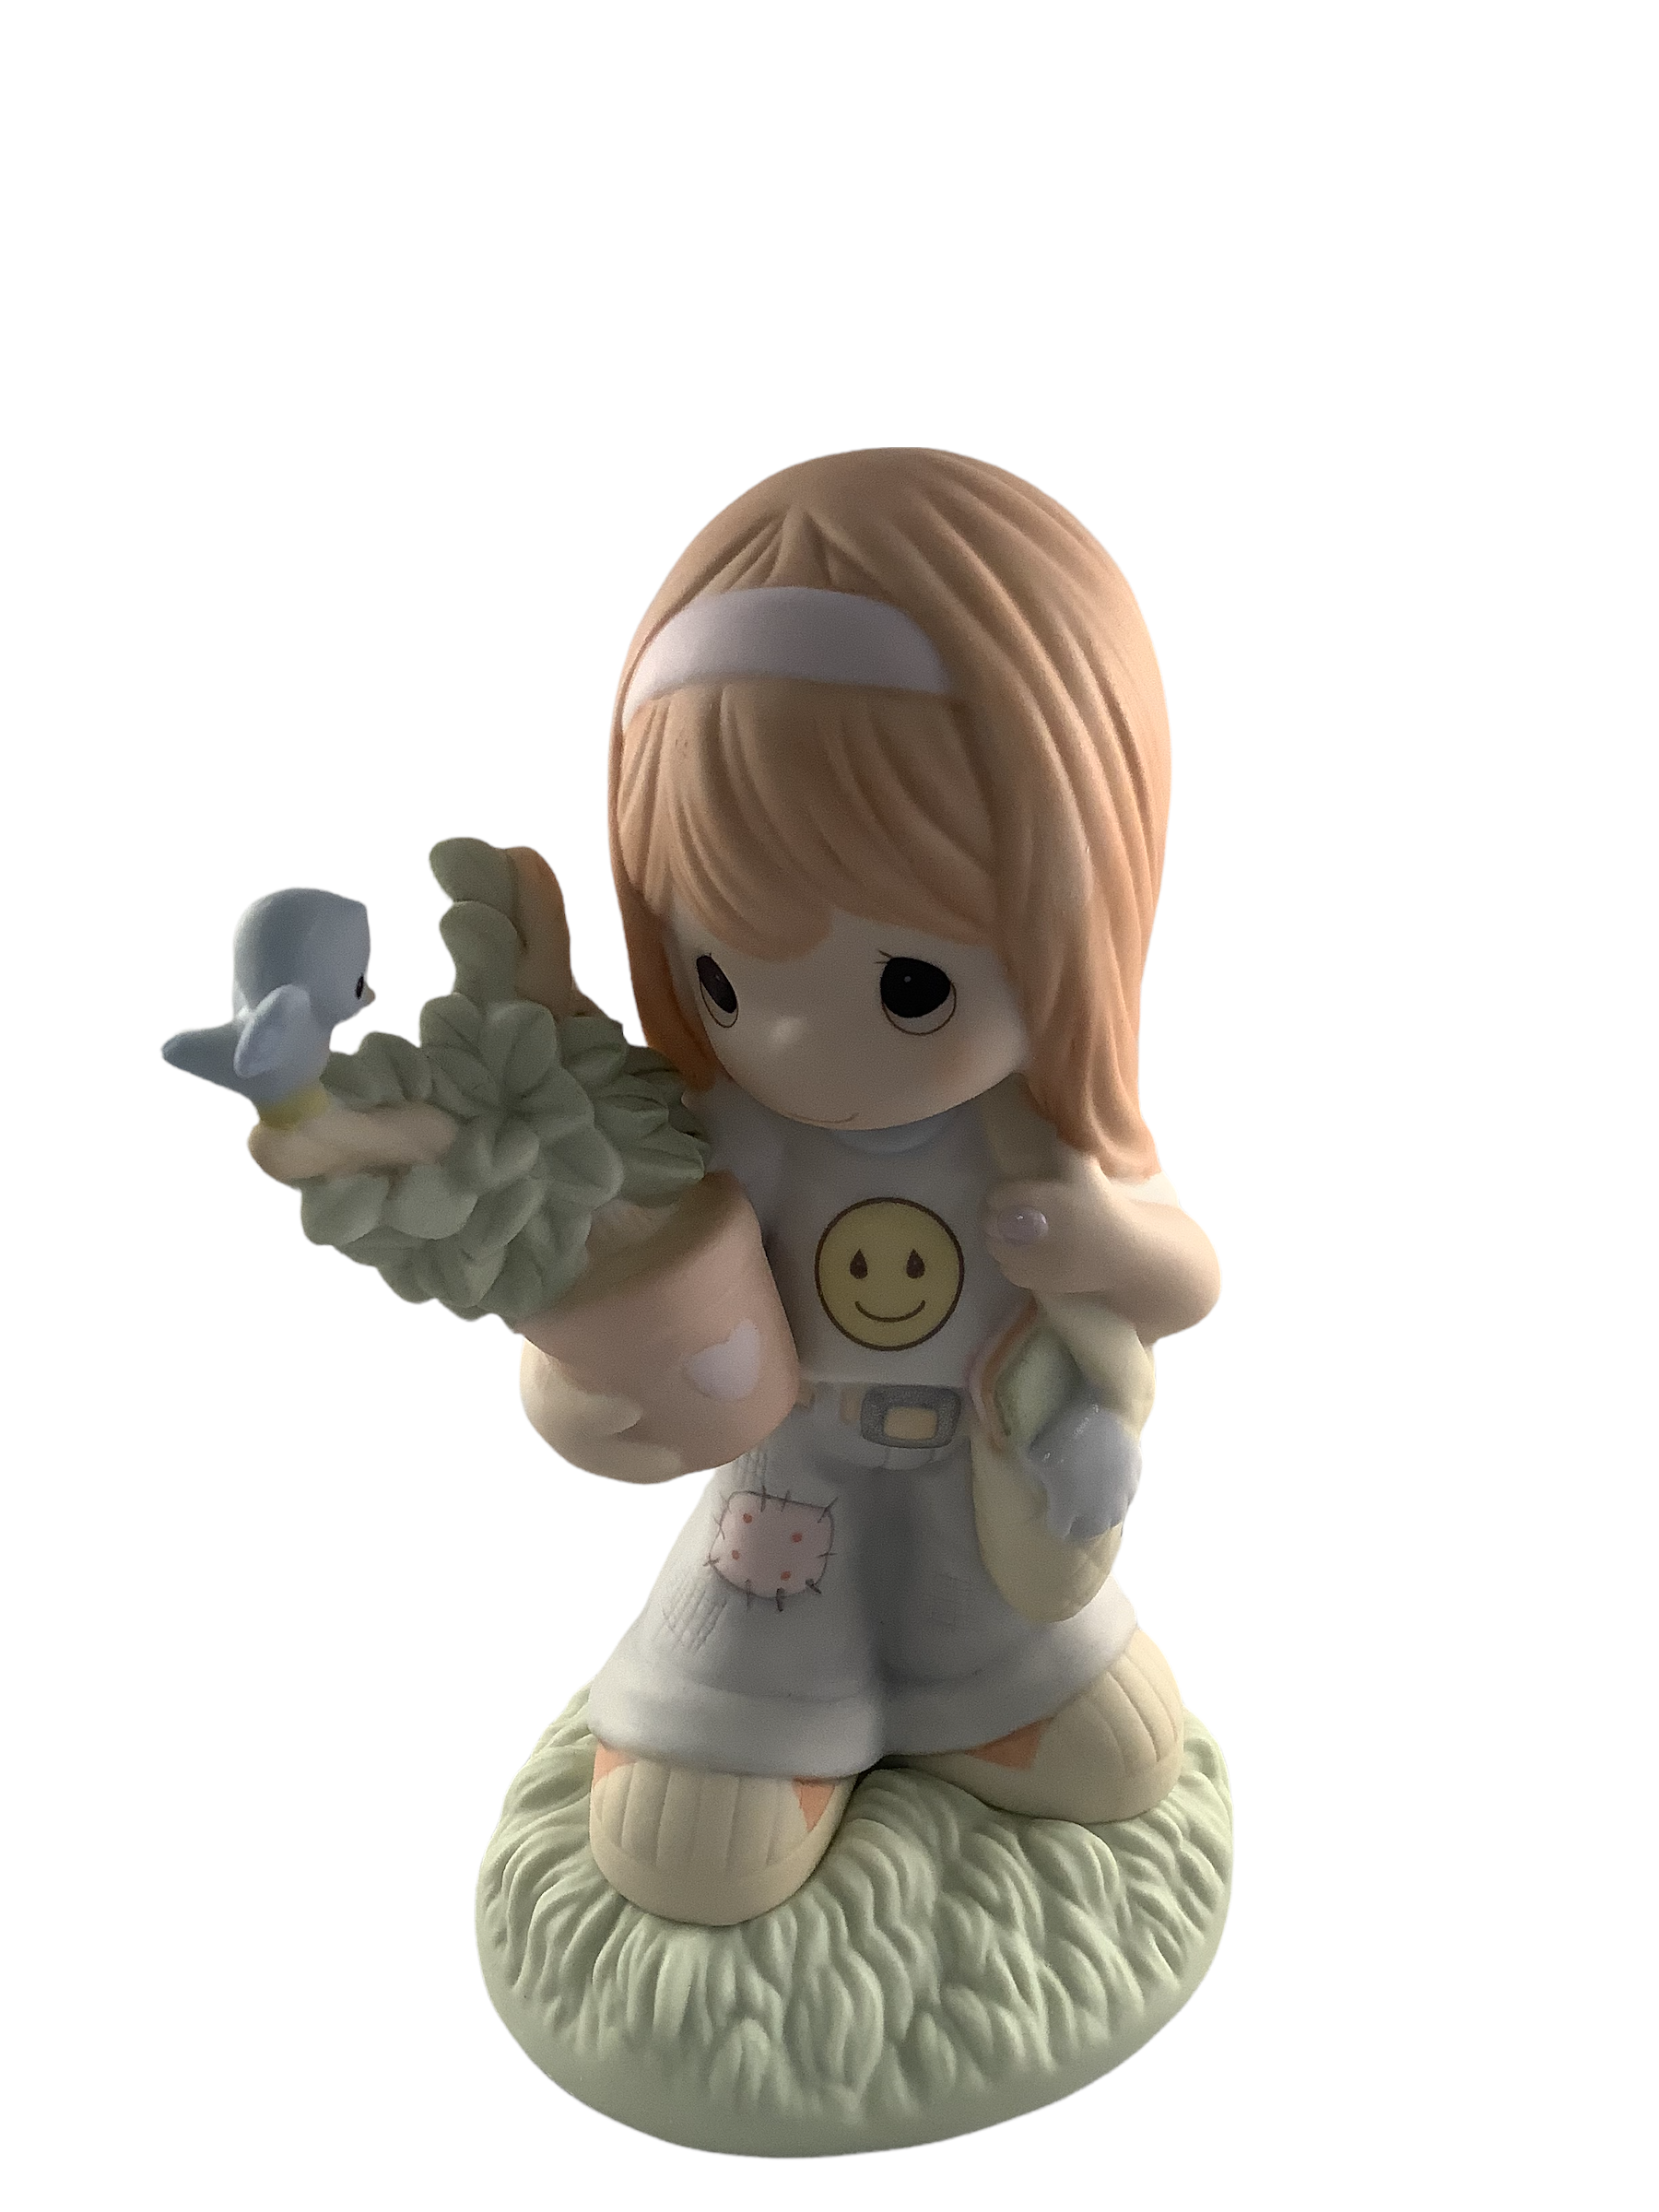 From Small Beginnings Come Great Things - Precious Moment Figurine